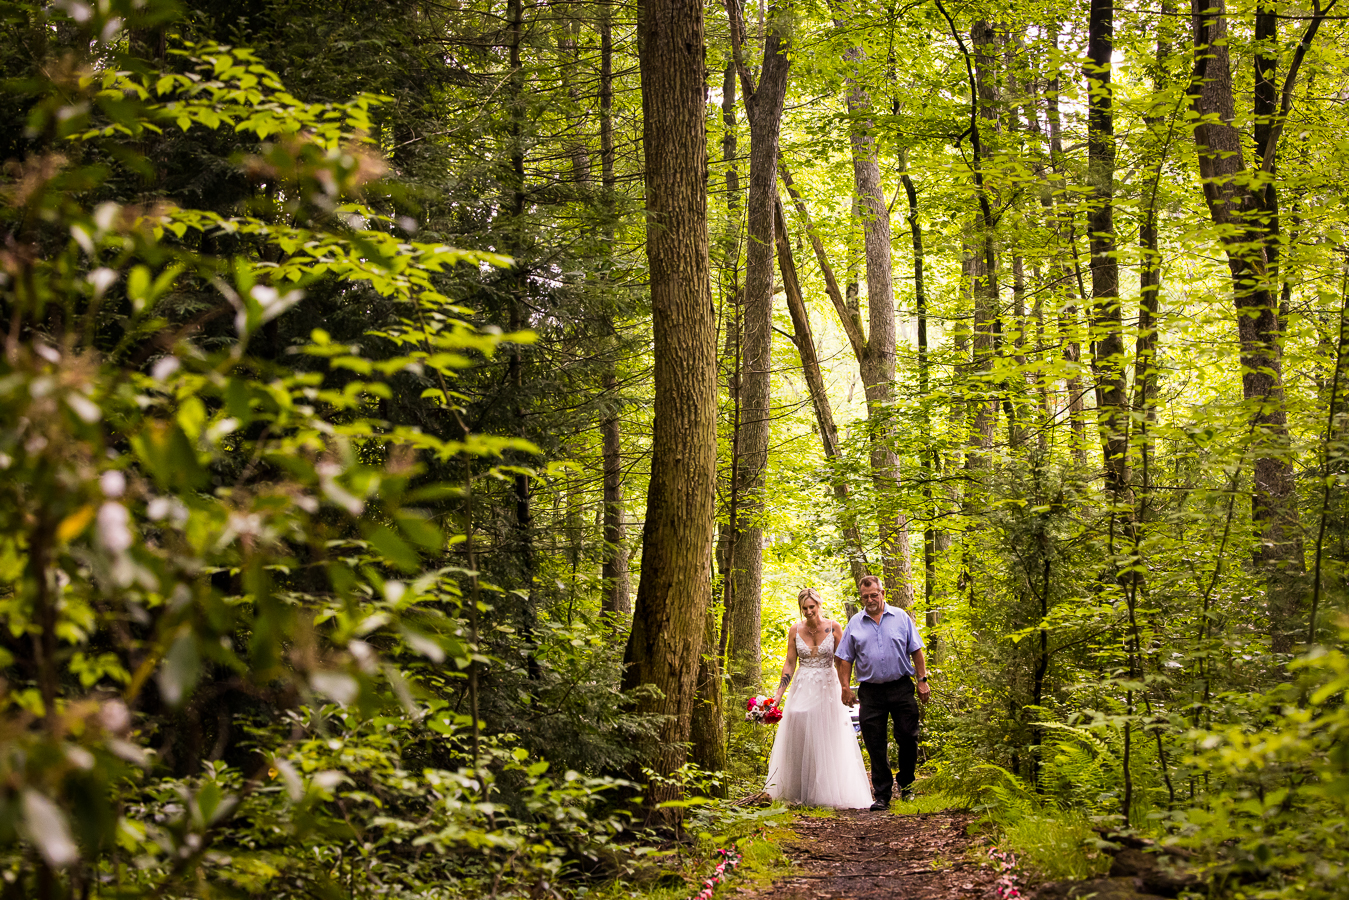 pa wedding photographer, lisa rhinehart, captures this vibrant, unique image of the bride and her father walking down the hiking trail as they make their way to the groom 